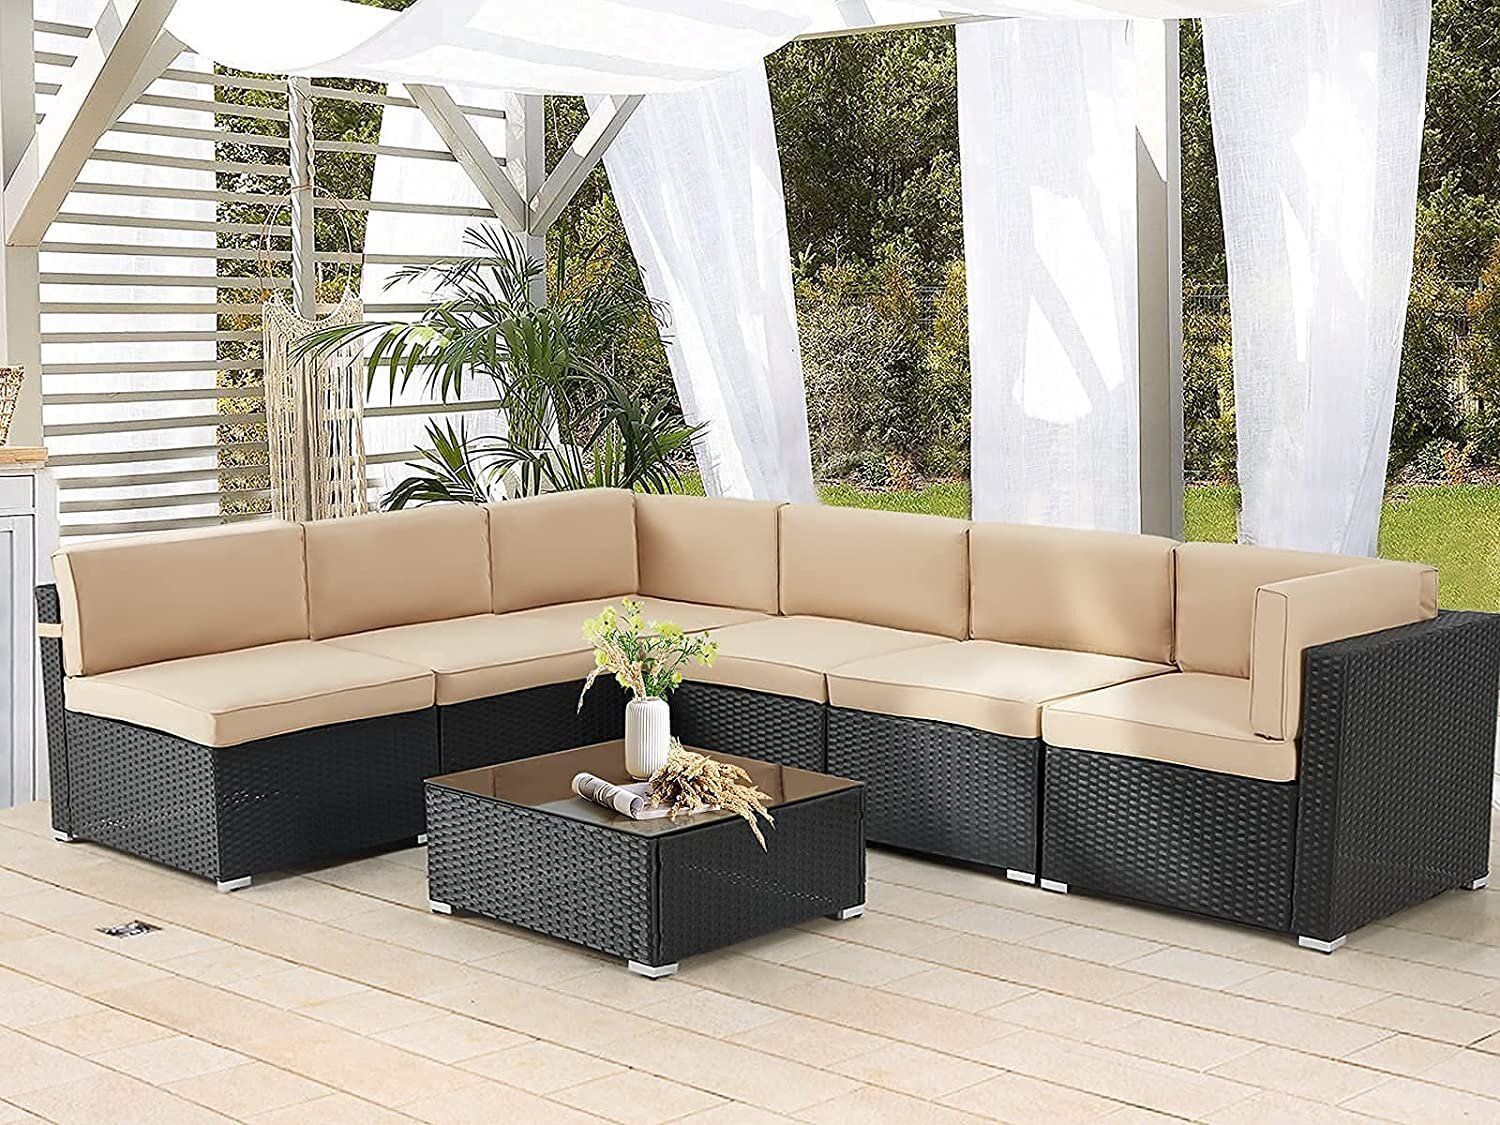 Ebern Designs Emilienne 7 Piece Rattan Sectional Seating Group With  Cushions & Reviews | Wayfair For 7 Piece Rattan Sectional Sofa Set (View 12 of 15)